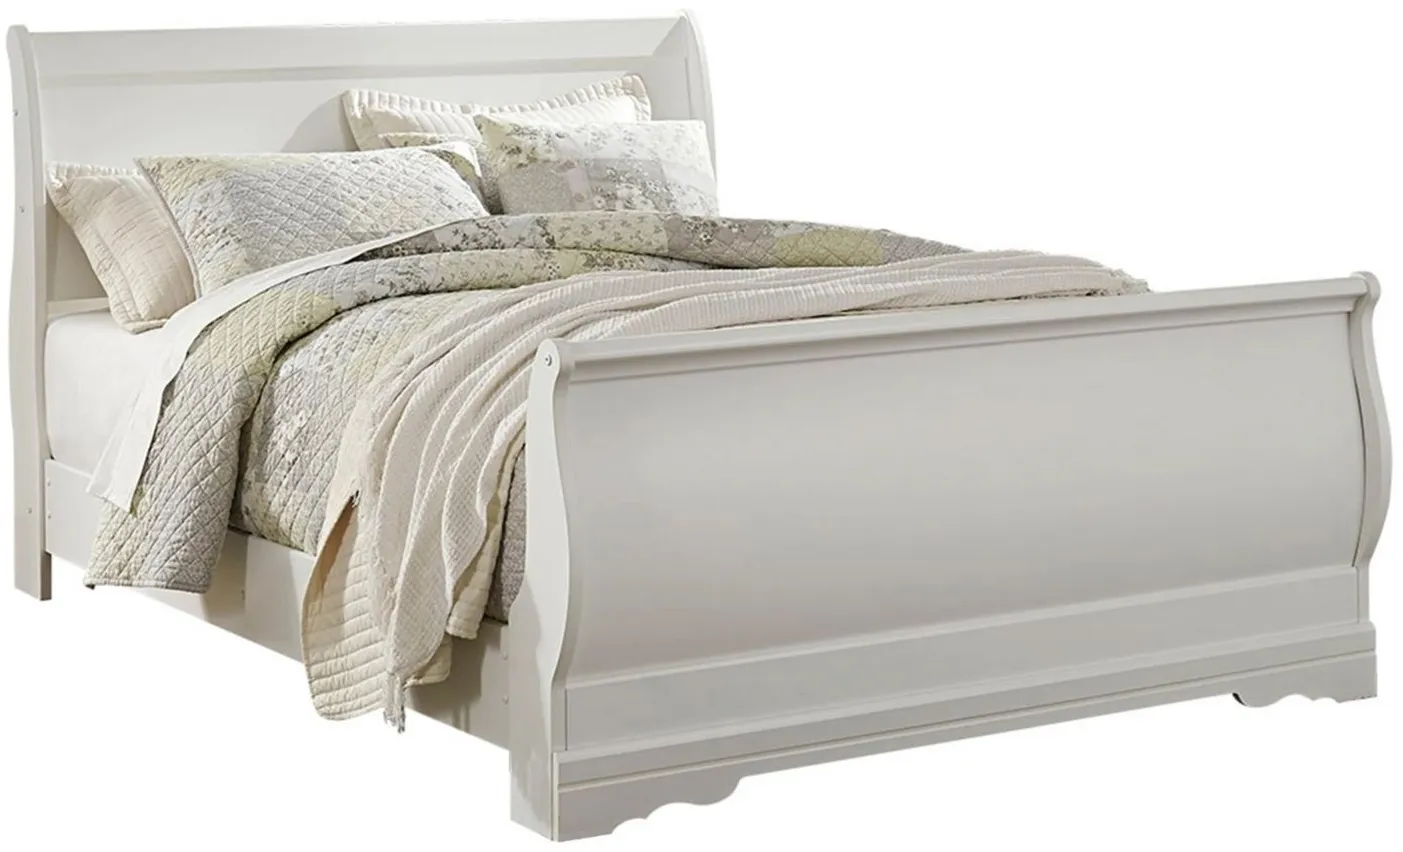 Anarasia Queen Sleigh Bed in White by Ashley Furniture